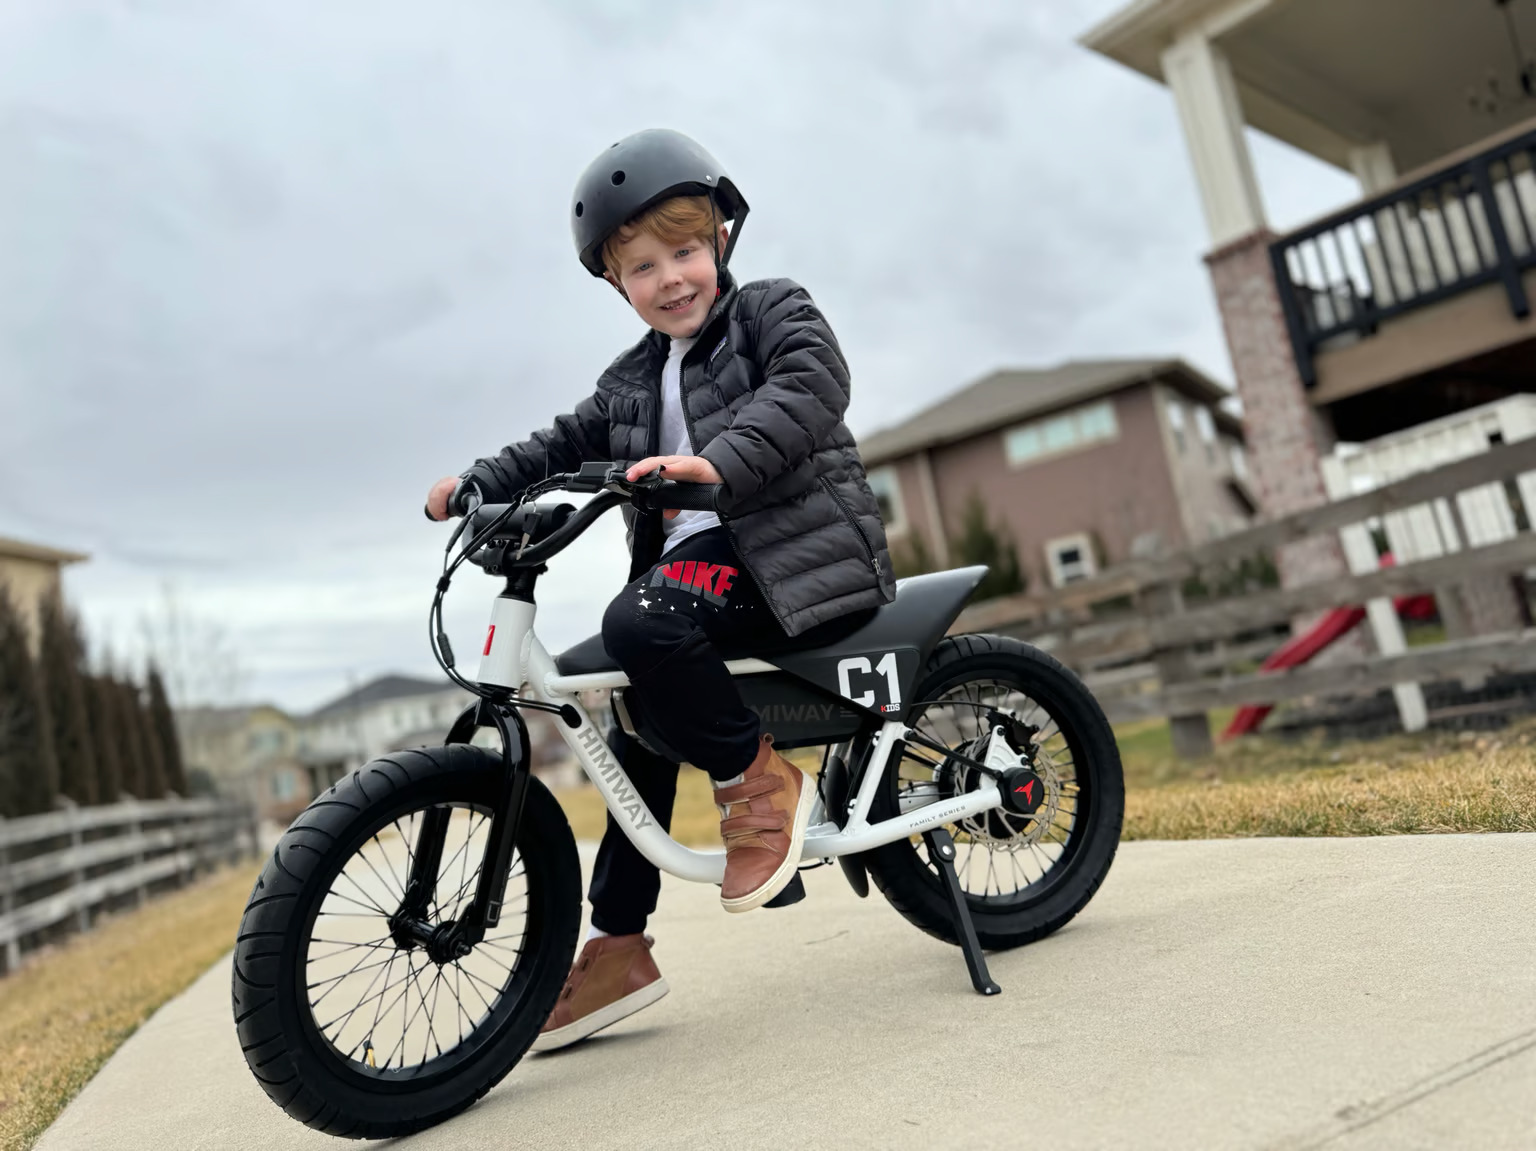 Himiway C1 E-Bike Reviews for Young Riders